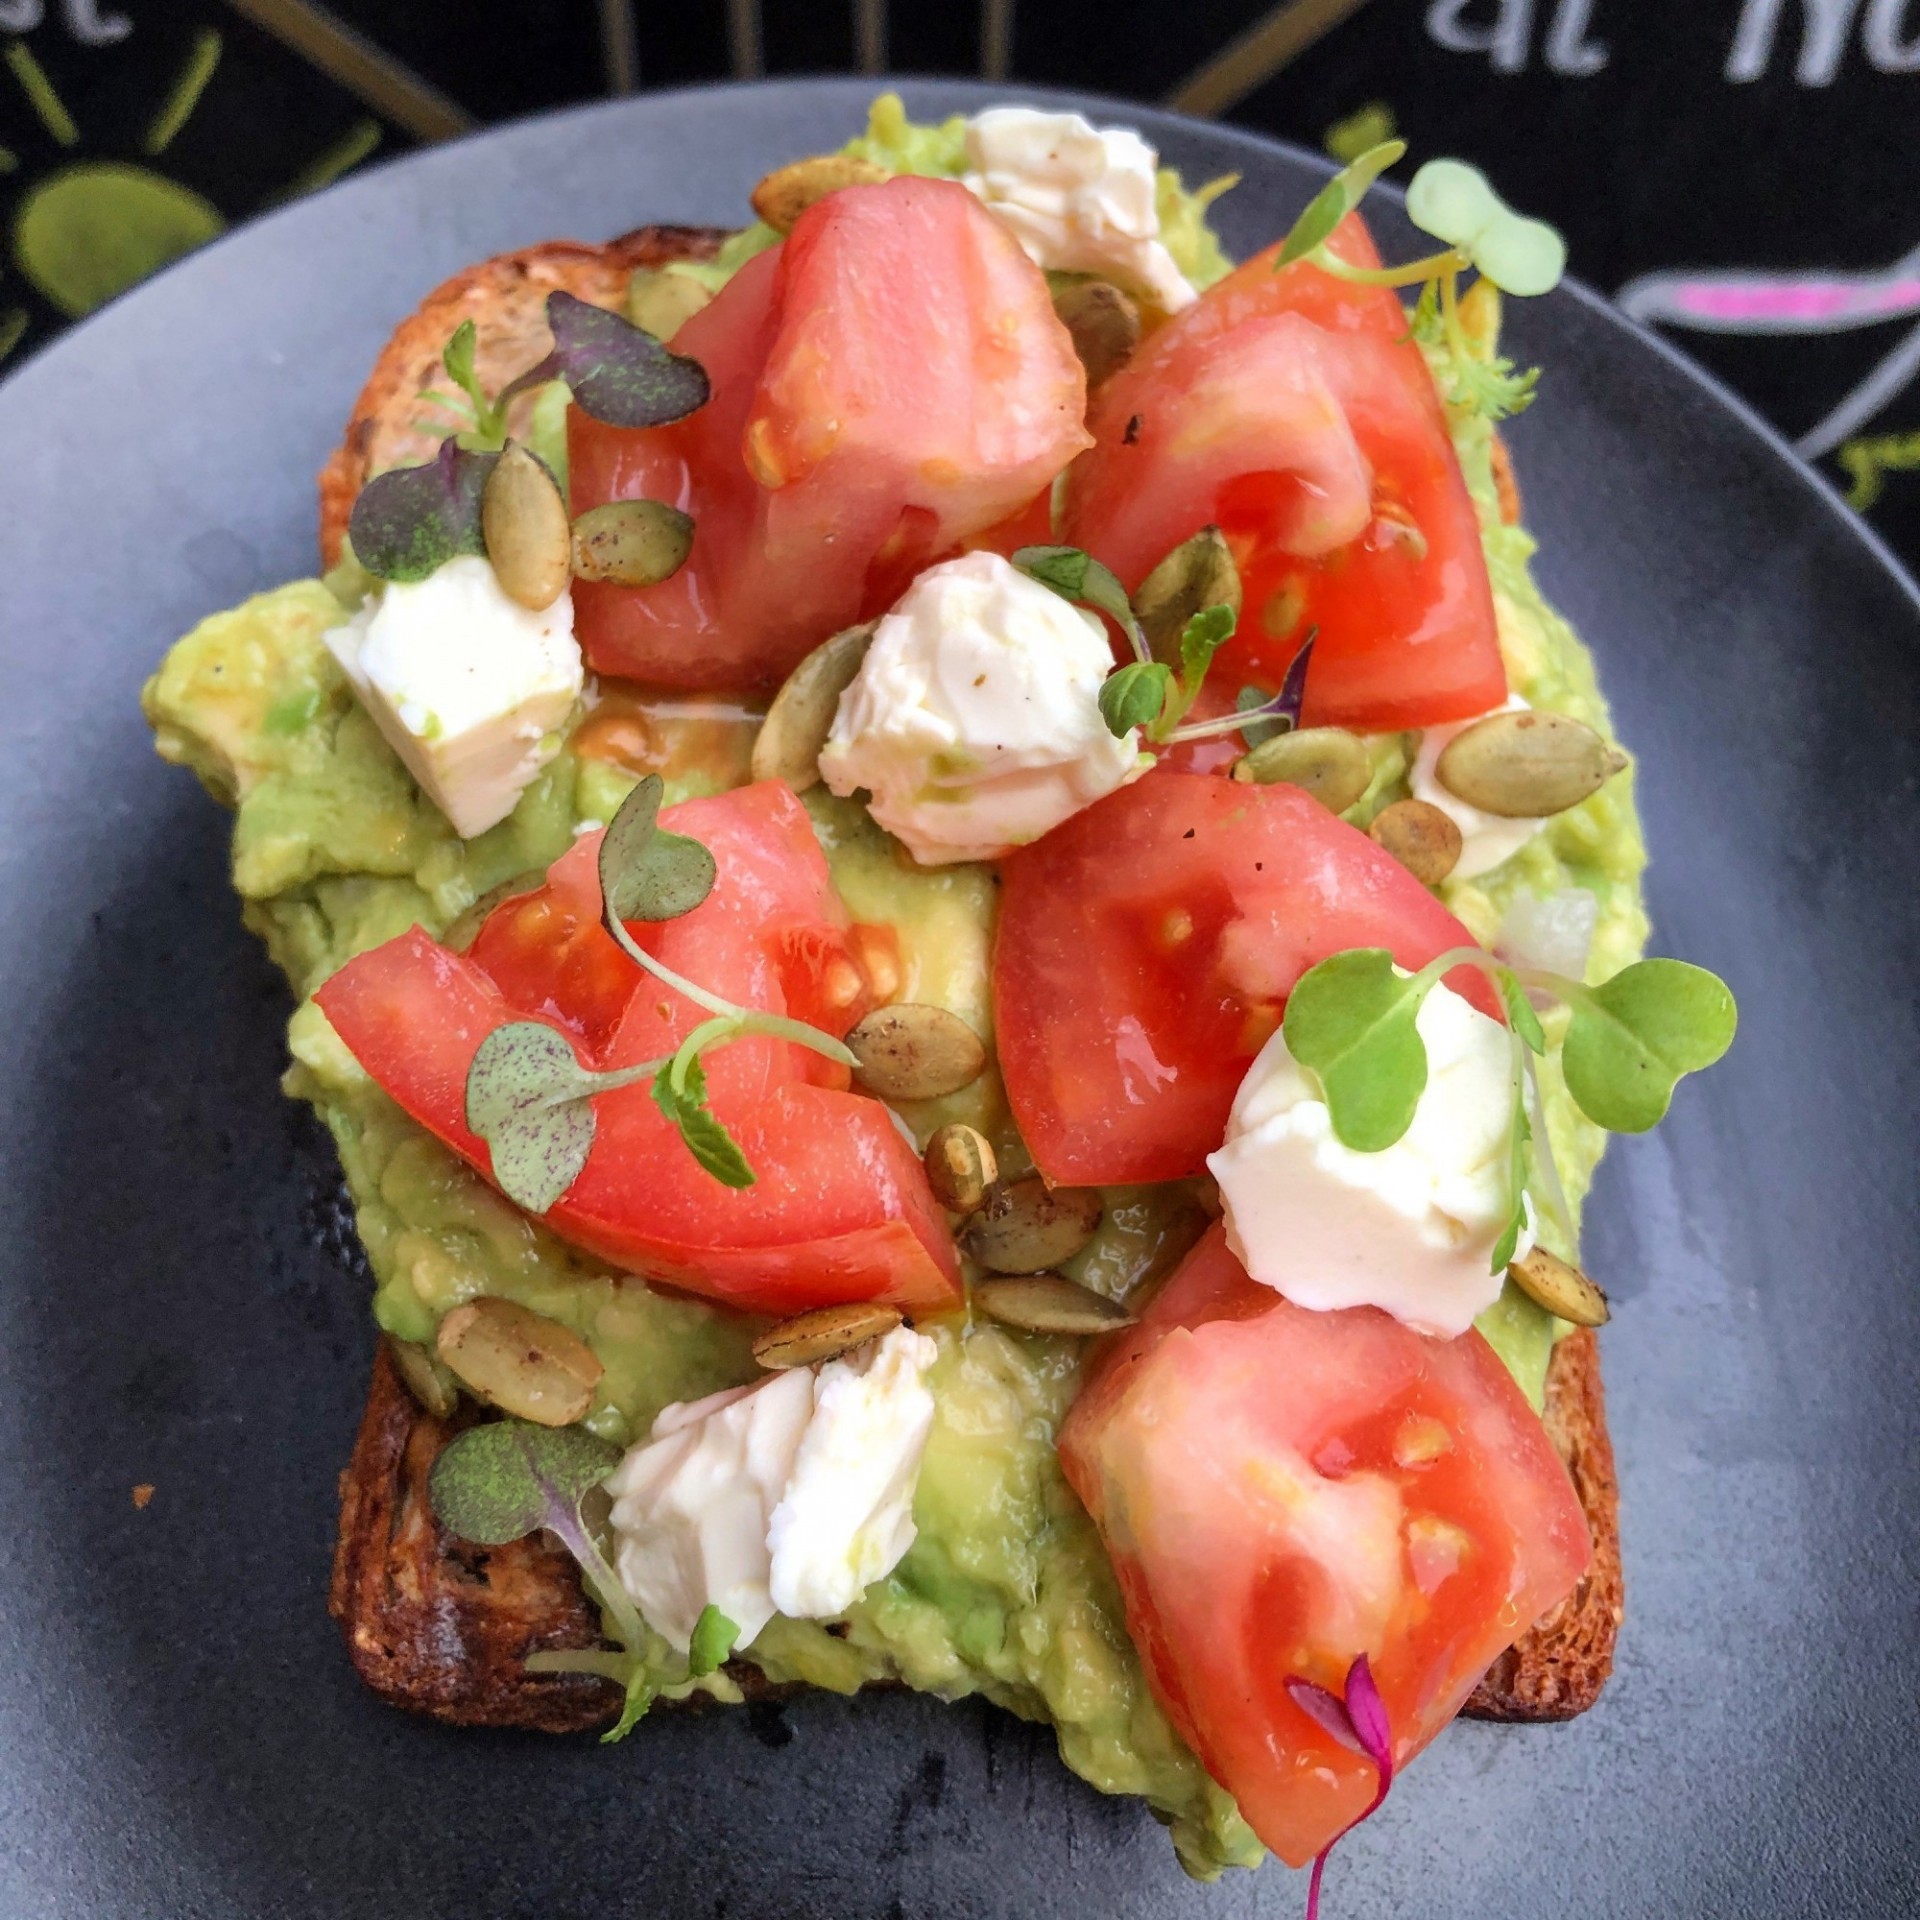 Avocado toast with goat cheese, pumpkin seeds, and tomatoes on a blue plate